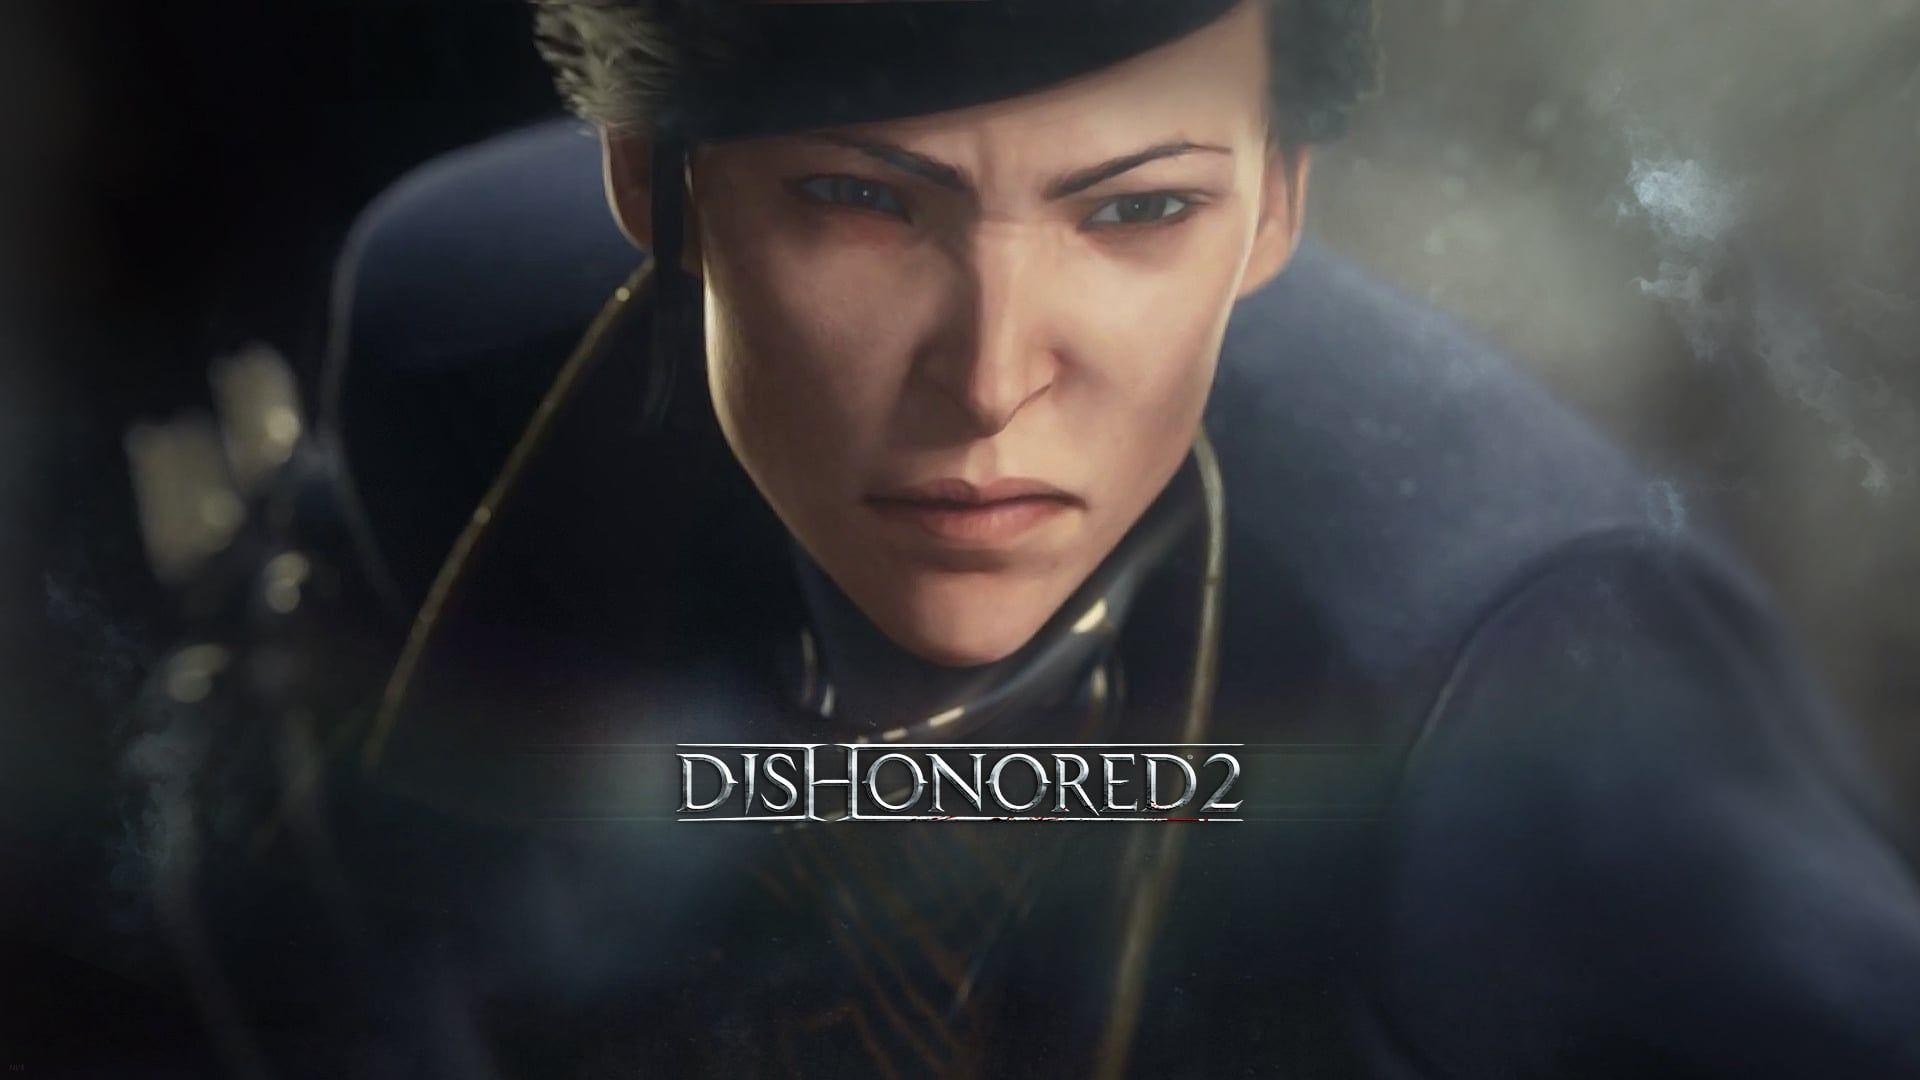 Emily Dishonored 2 Wallpaper Image